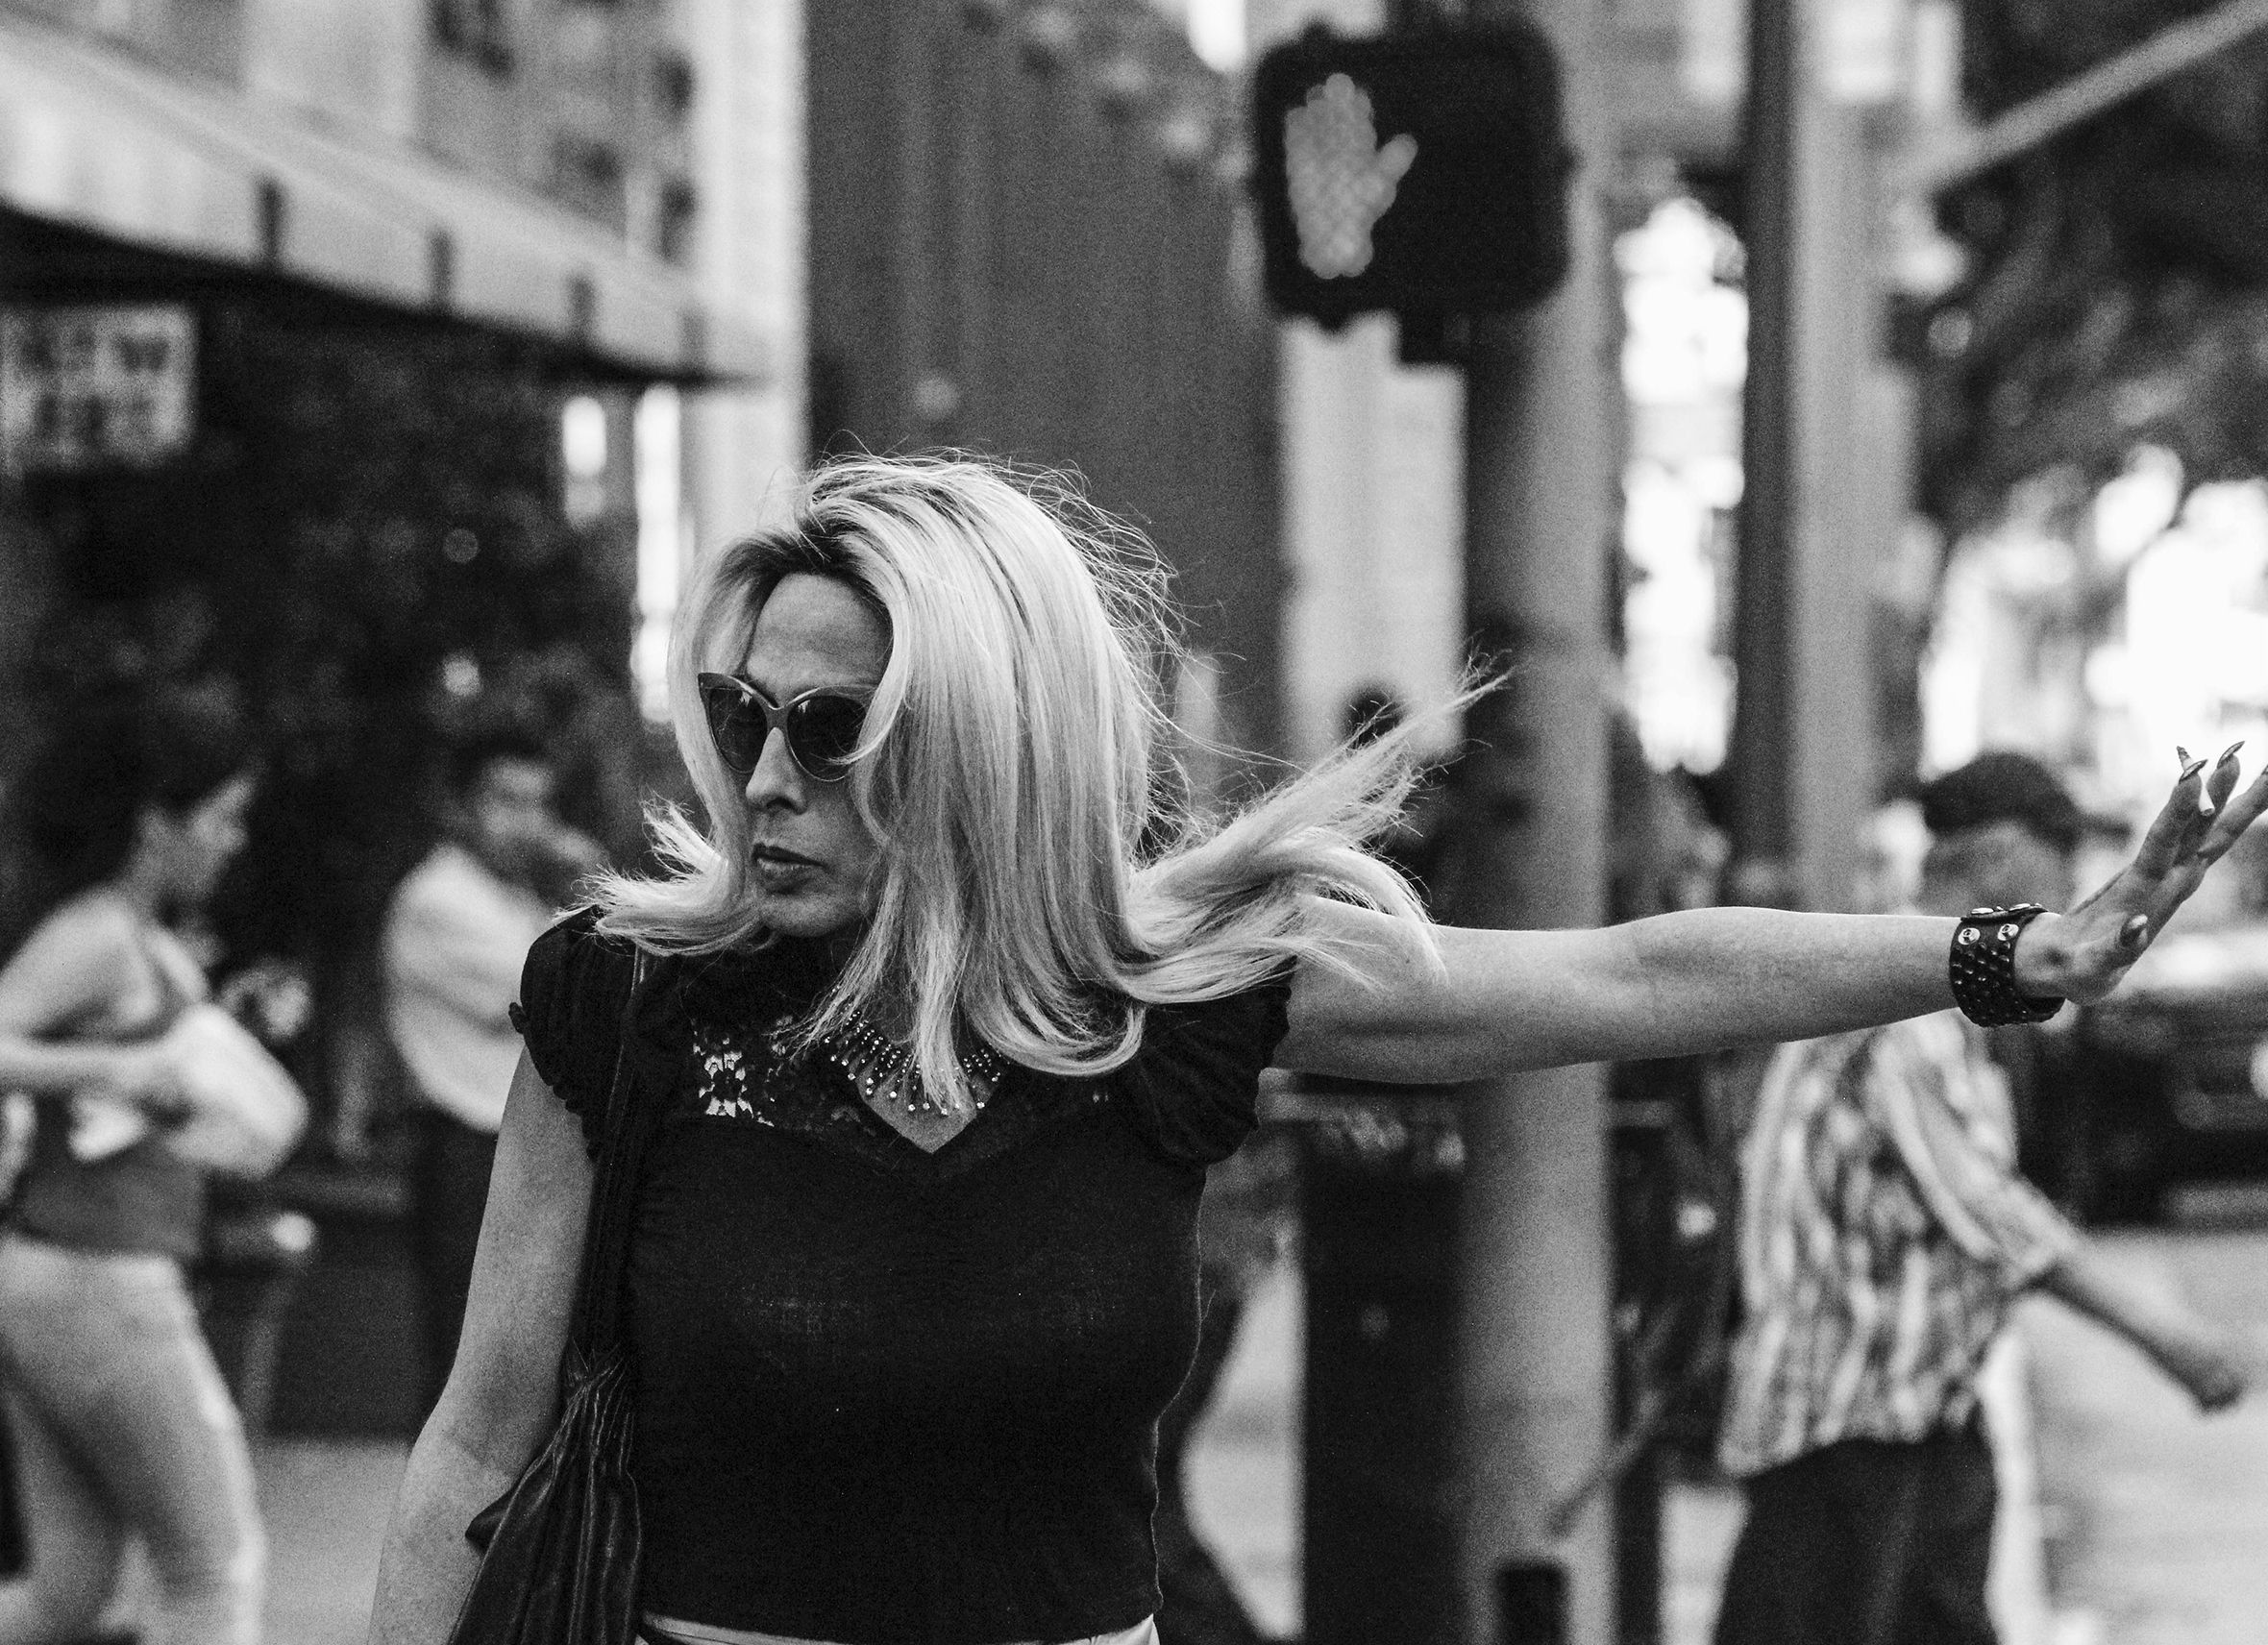 A woman in sunglasses with a resolute look stands facing the camera but looking right and extending her left arm straight out to the side with her hand raised signaling stop, while on a city street in front of a pedestrian signal of an upraised hand.